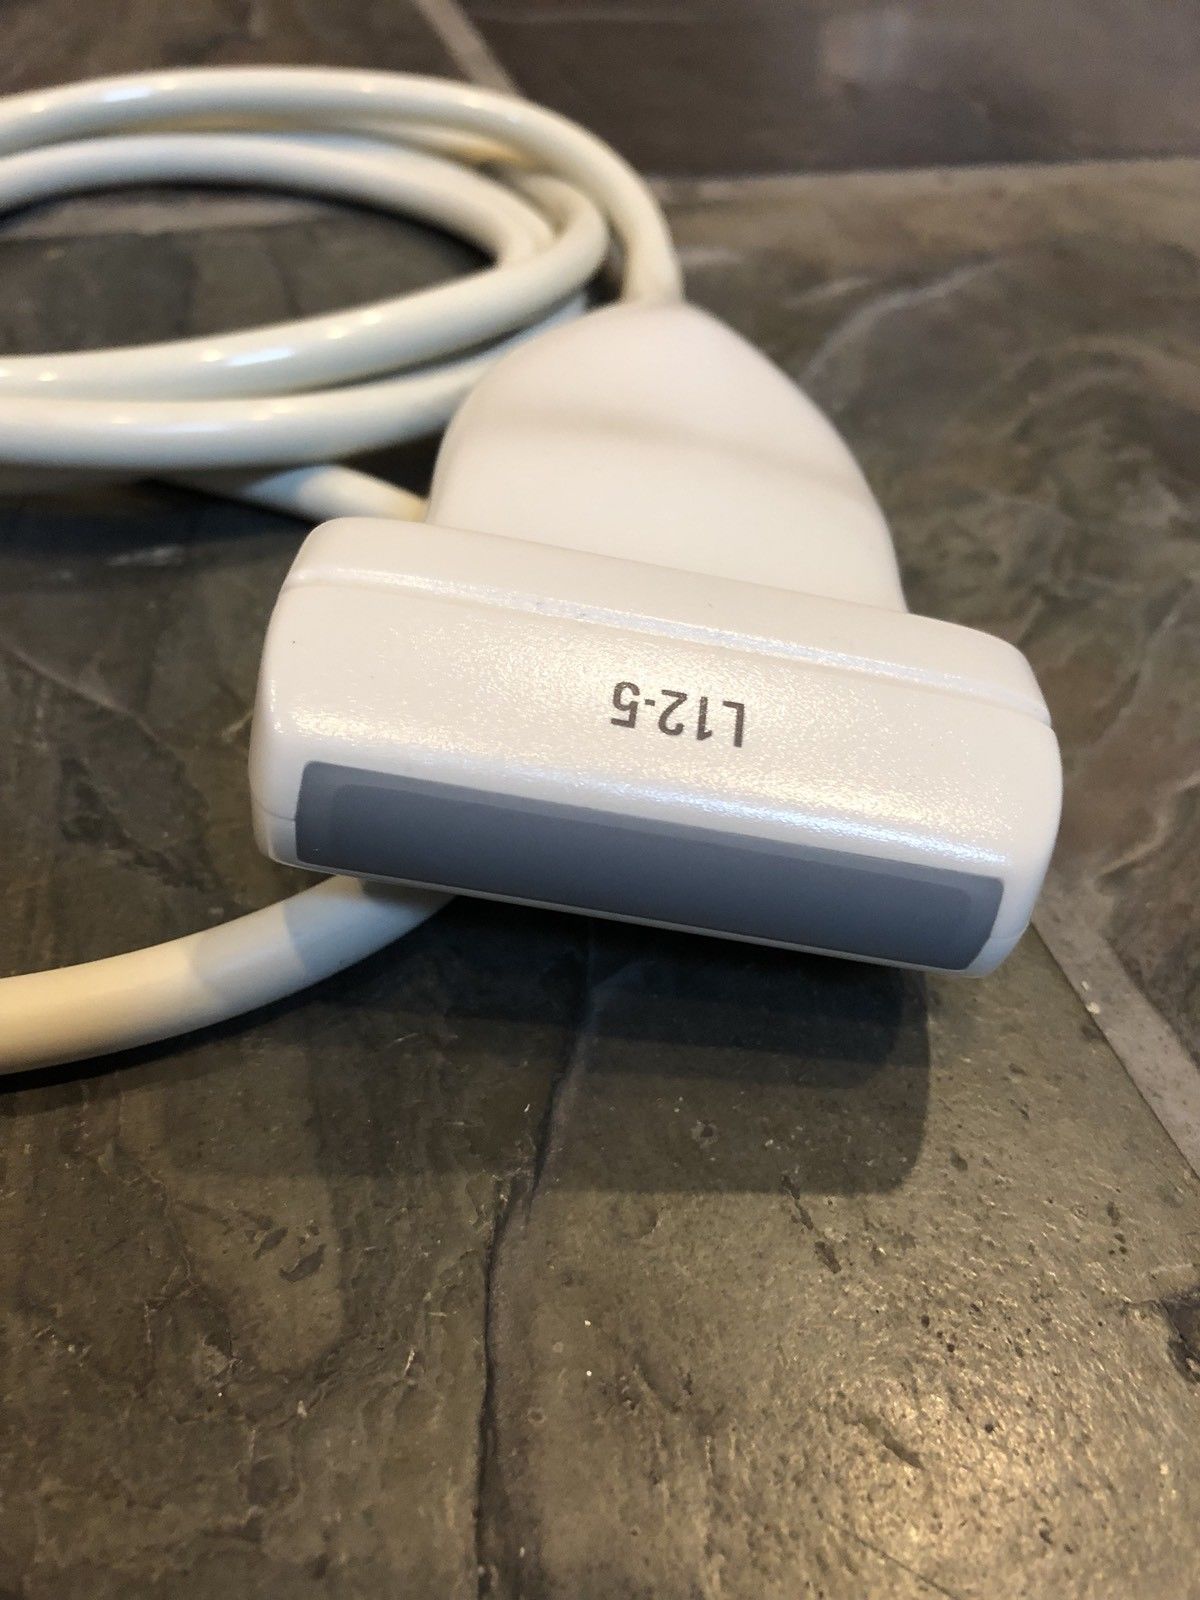 a close up of a white cord connected to a device